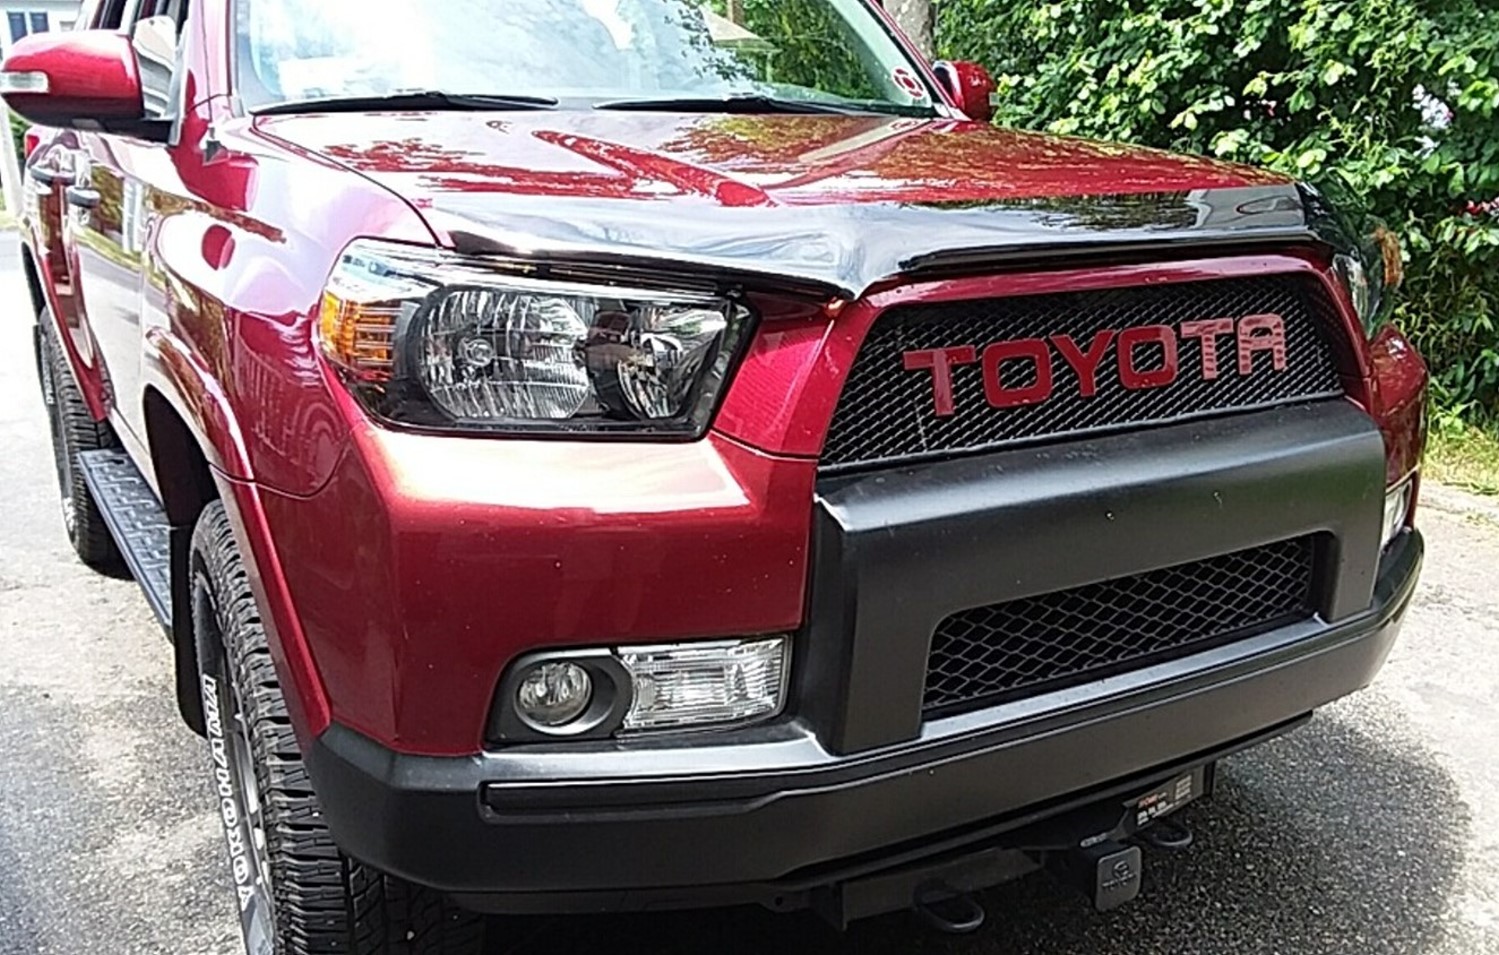 2010 - 2013 Toyota 4Runner Grill Mesh and Big Letters #5